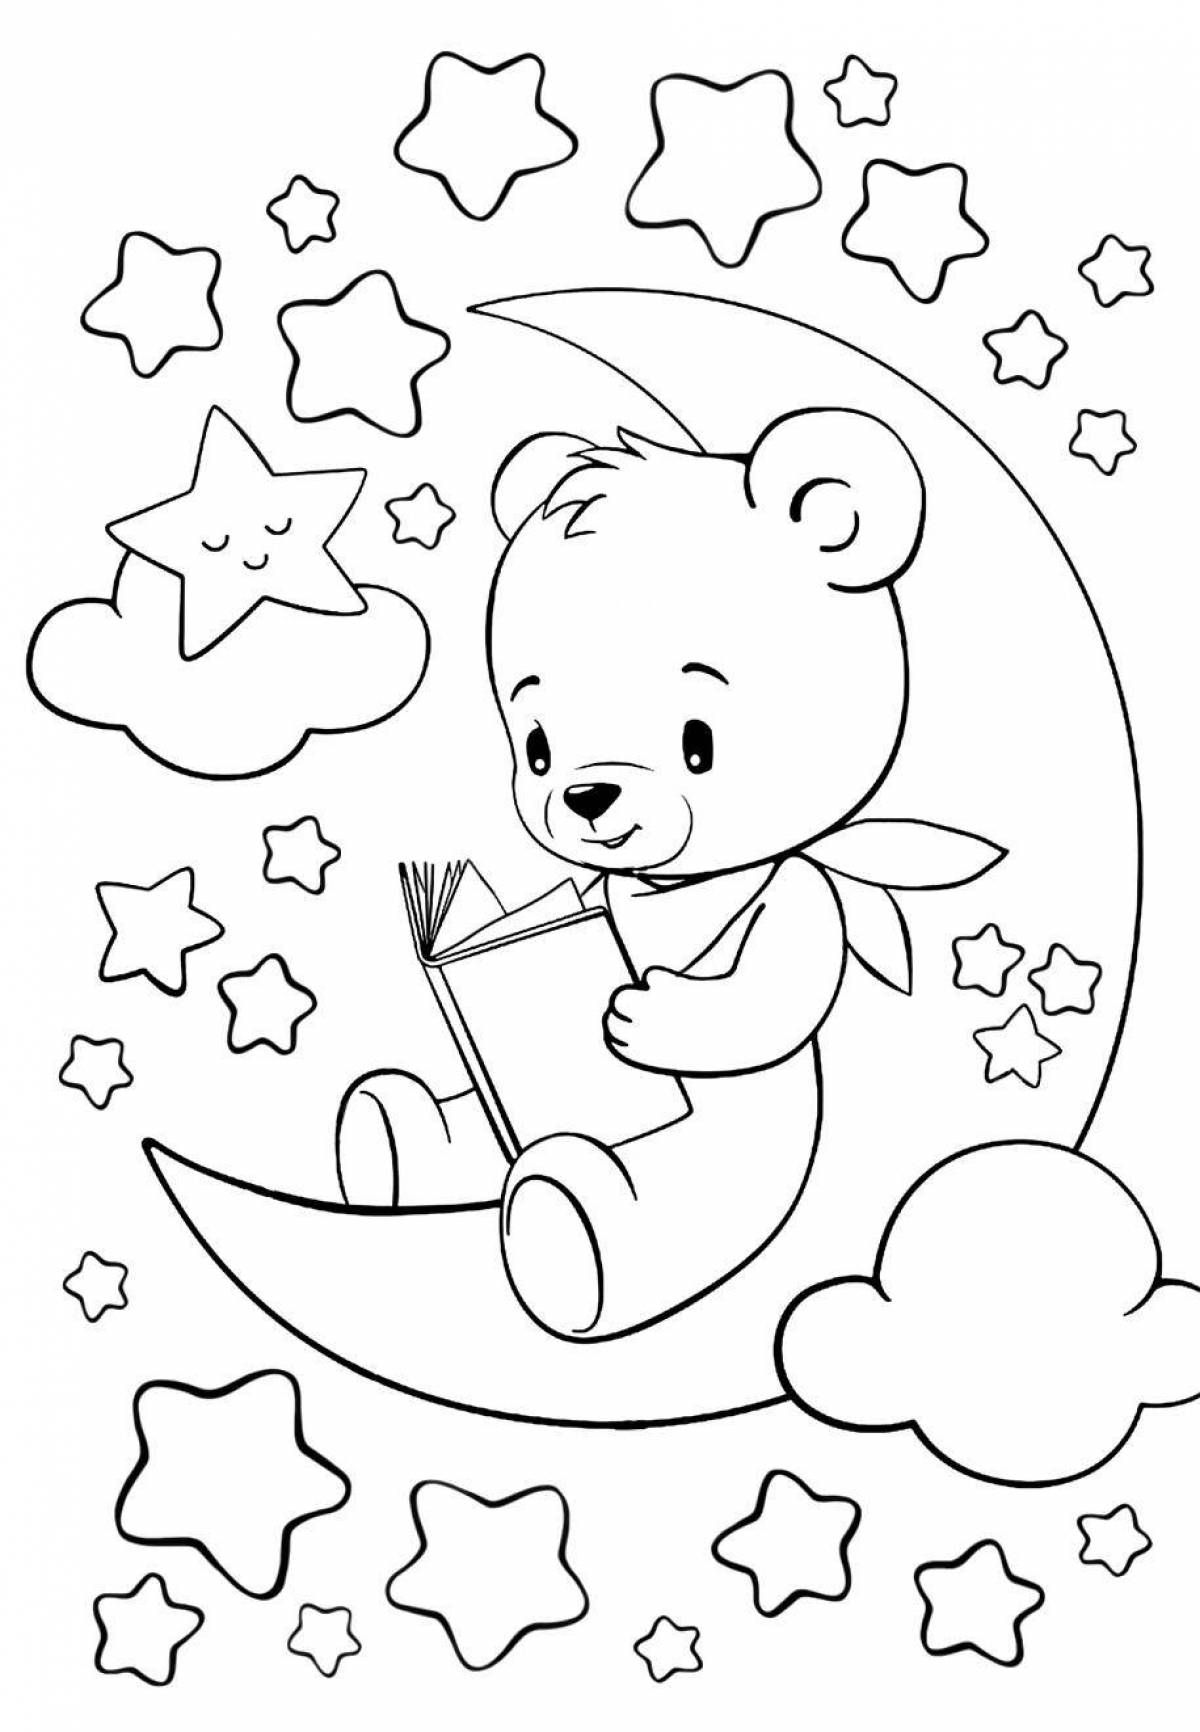 Coloring book shining bear on the moon